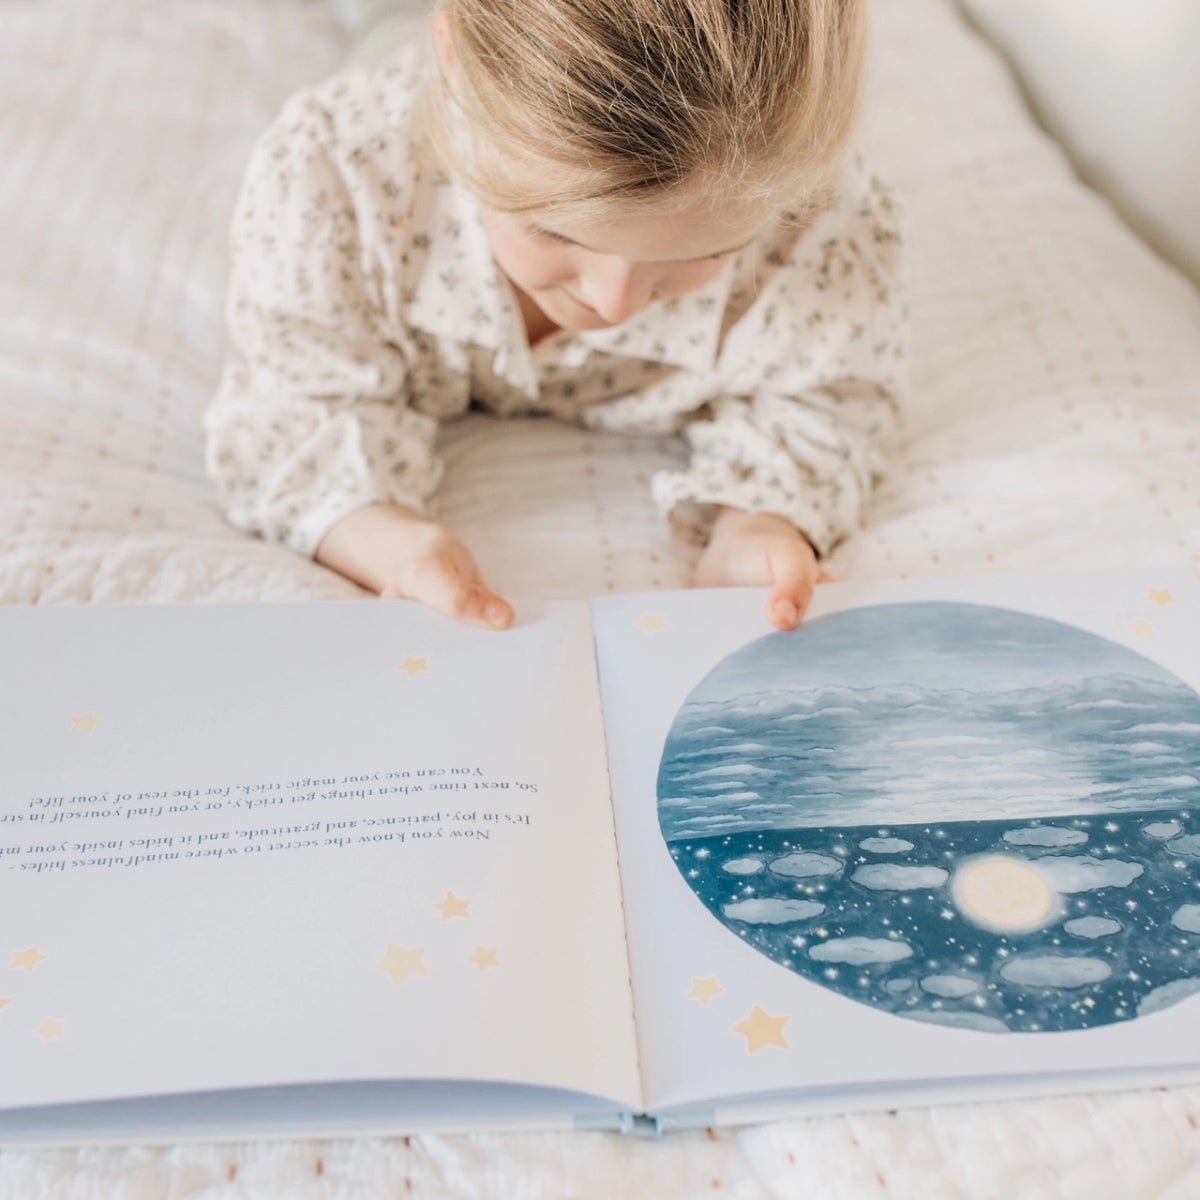 Charlie's Mindful Adventures by the Sea - Sensory Journey Kids Book